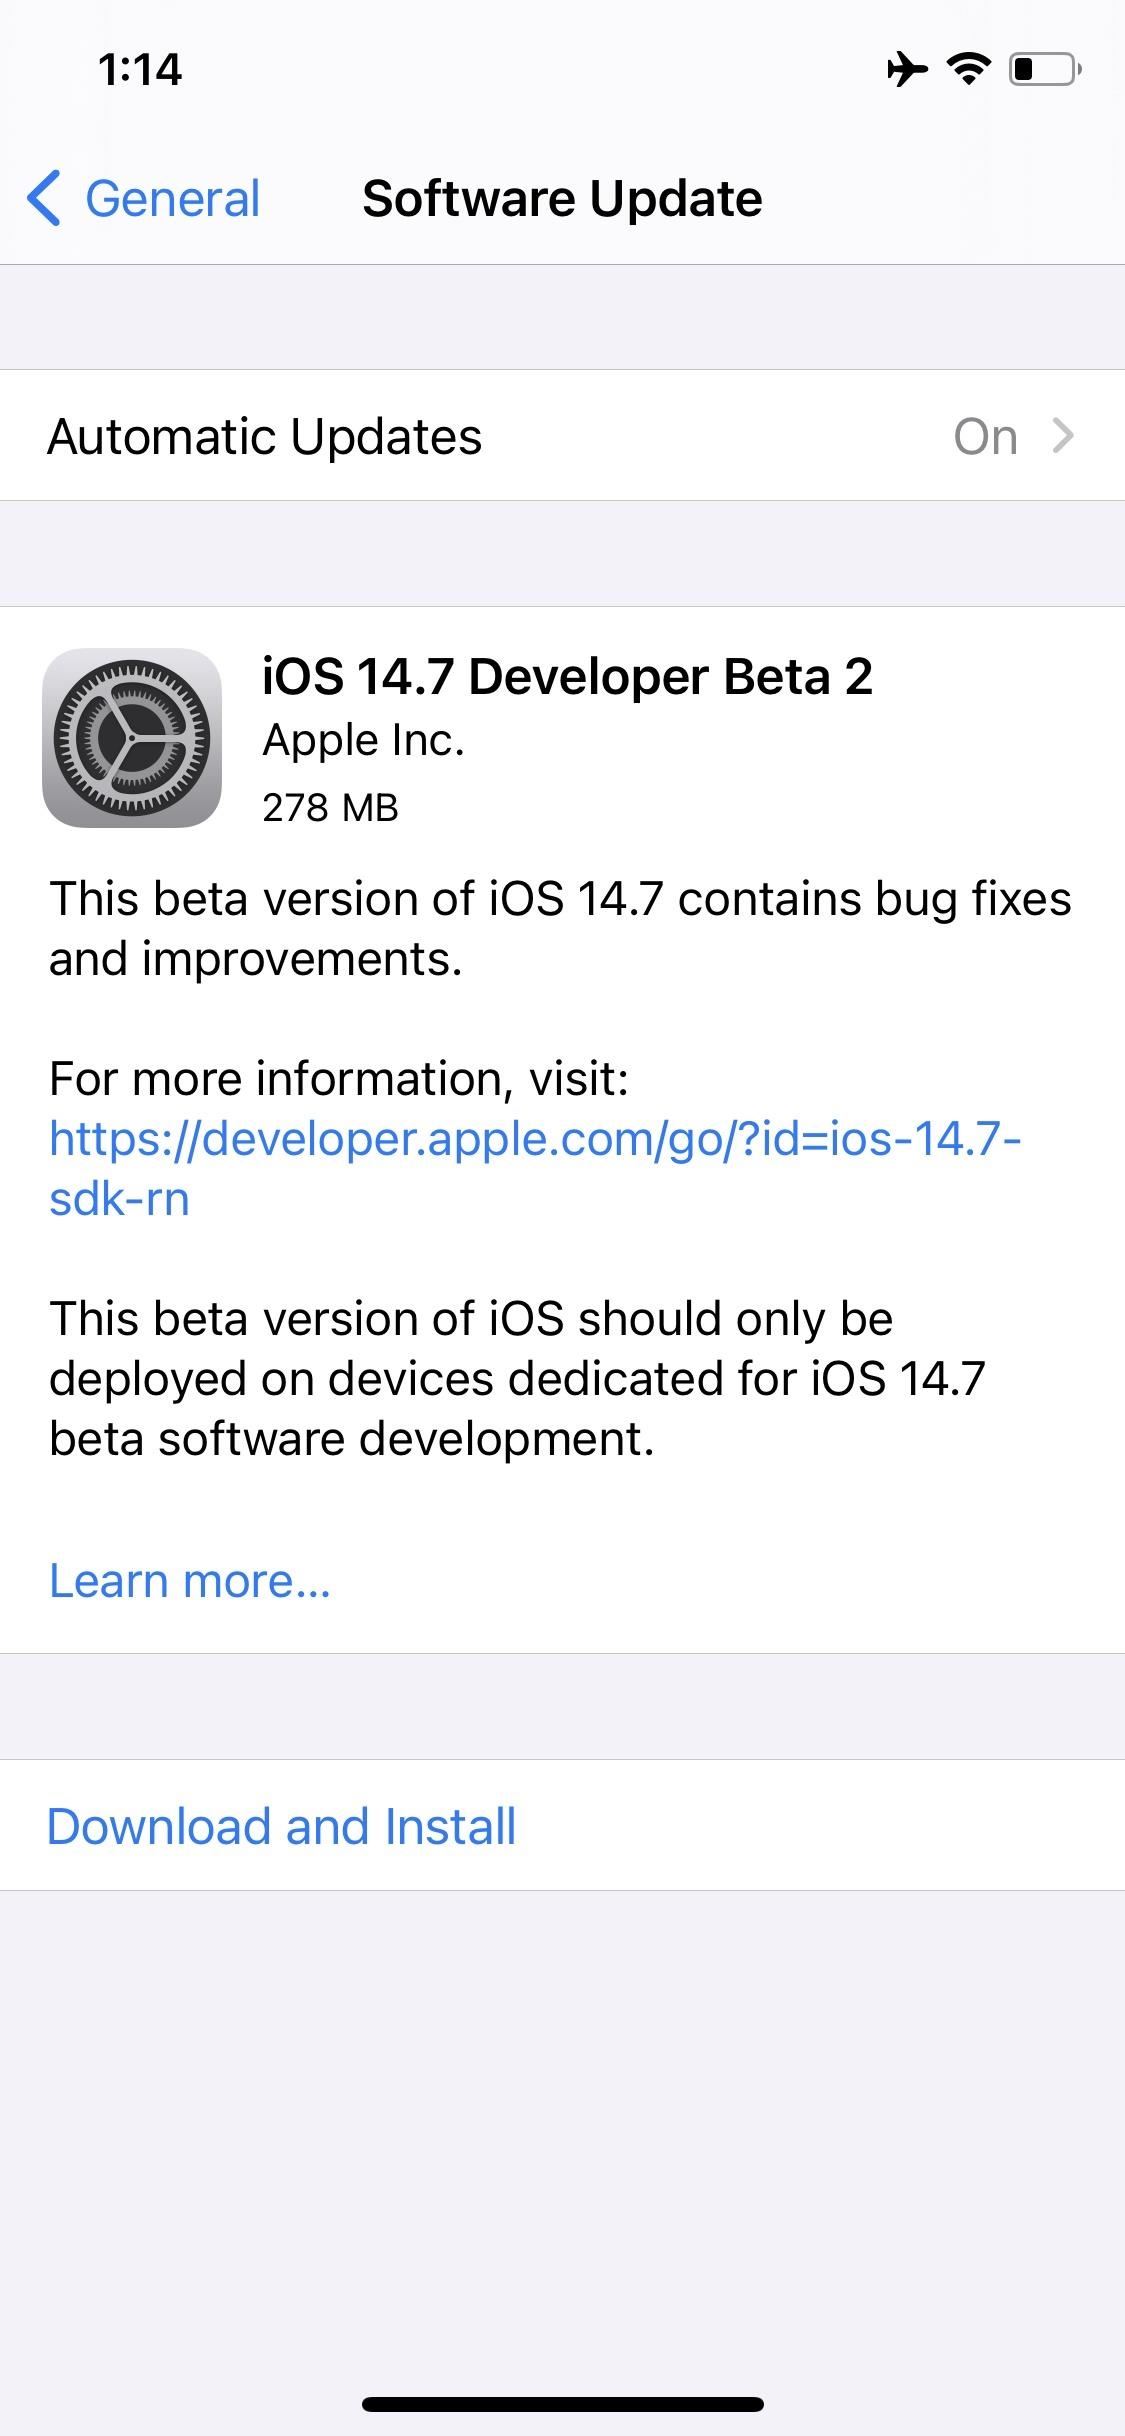 Apple Releases iOS 14.7 Beta 2 for iPhone